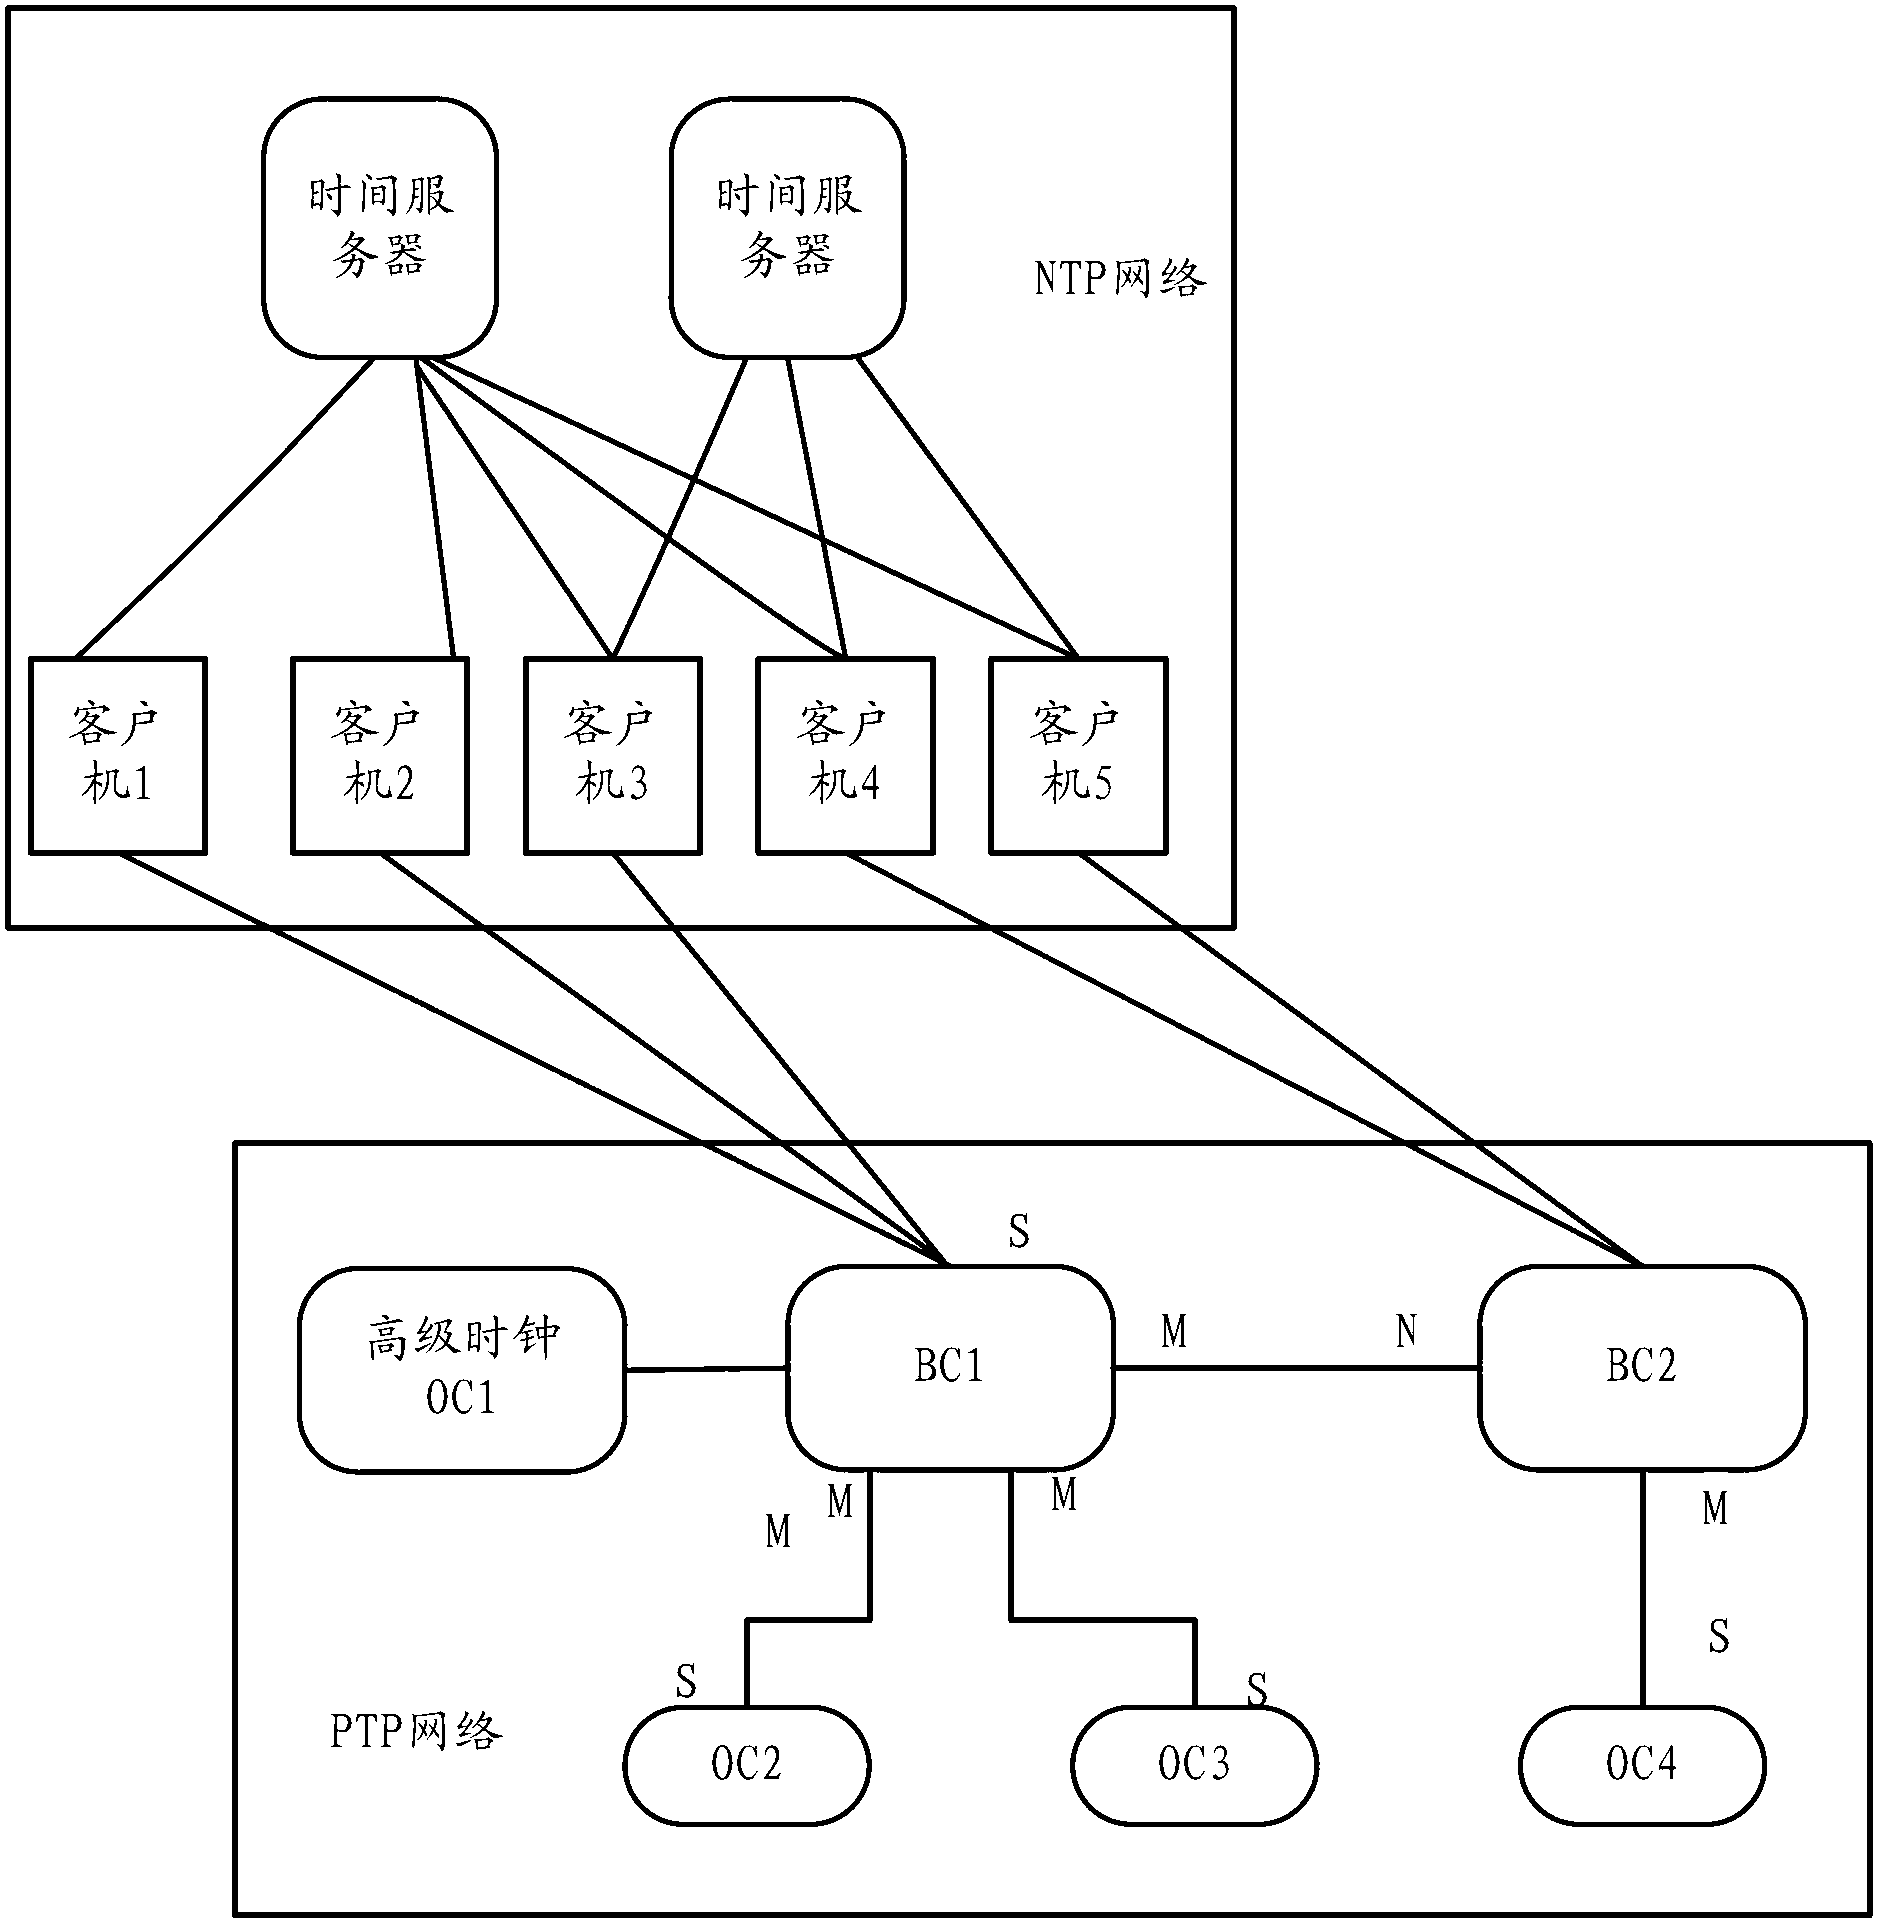 Clock synchronizing method for NTP network and PTP network